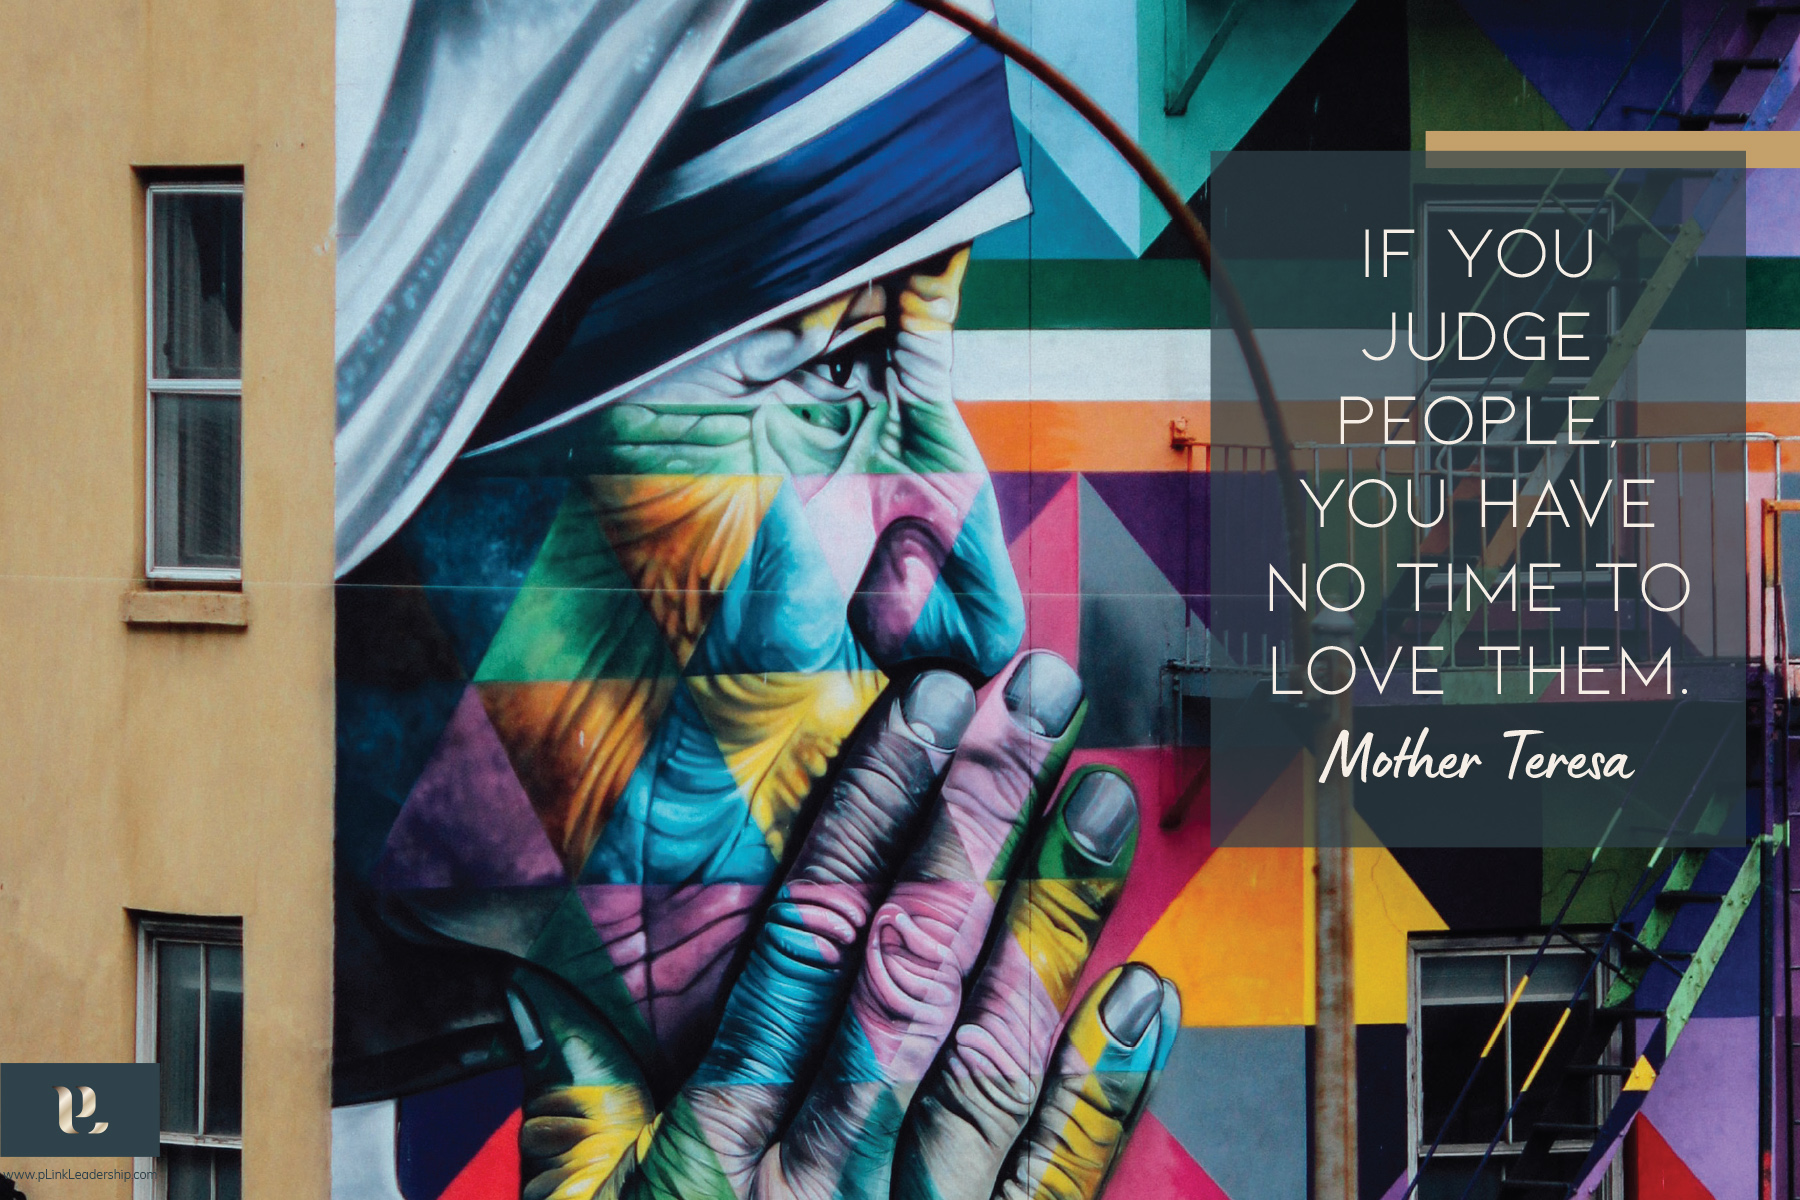 "If you judge people, you have no time to love them." Mother Theresa